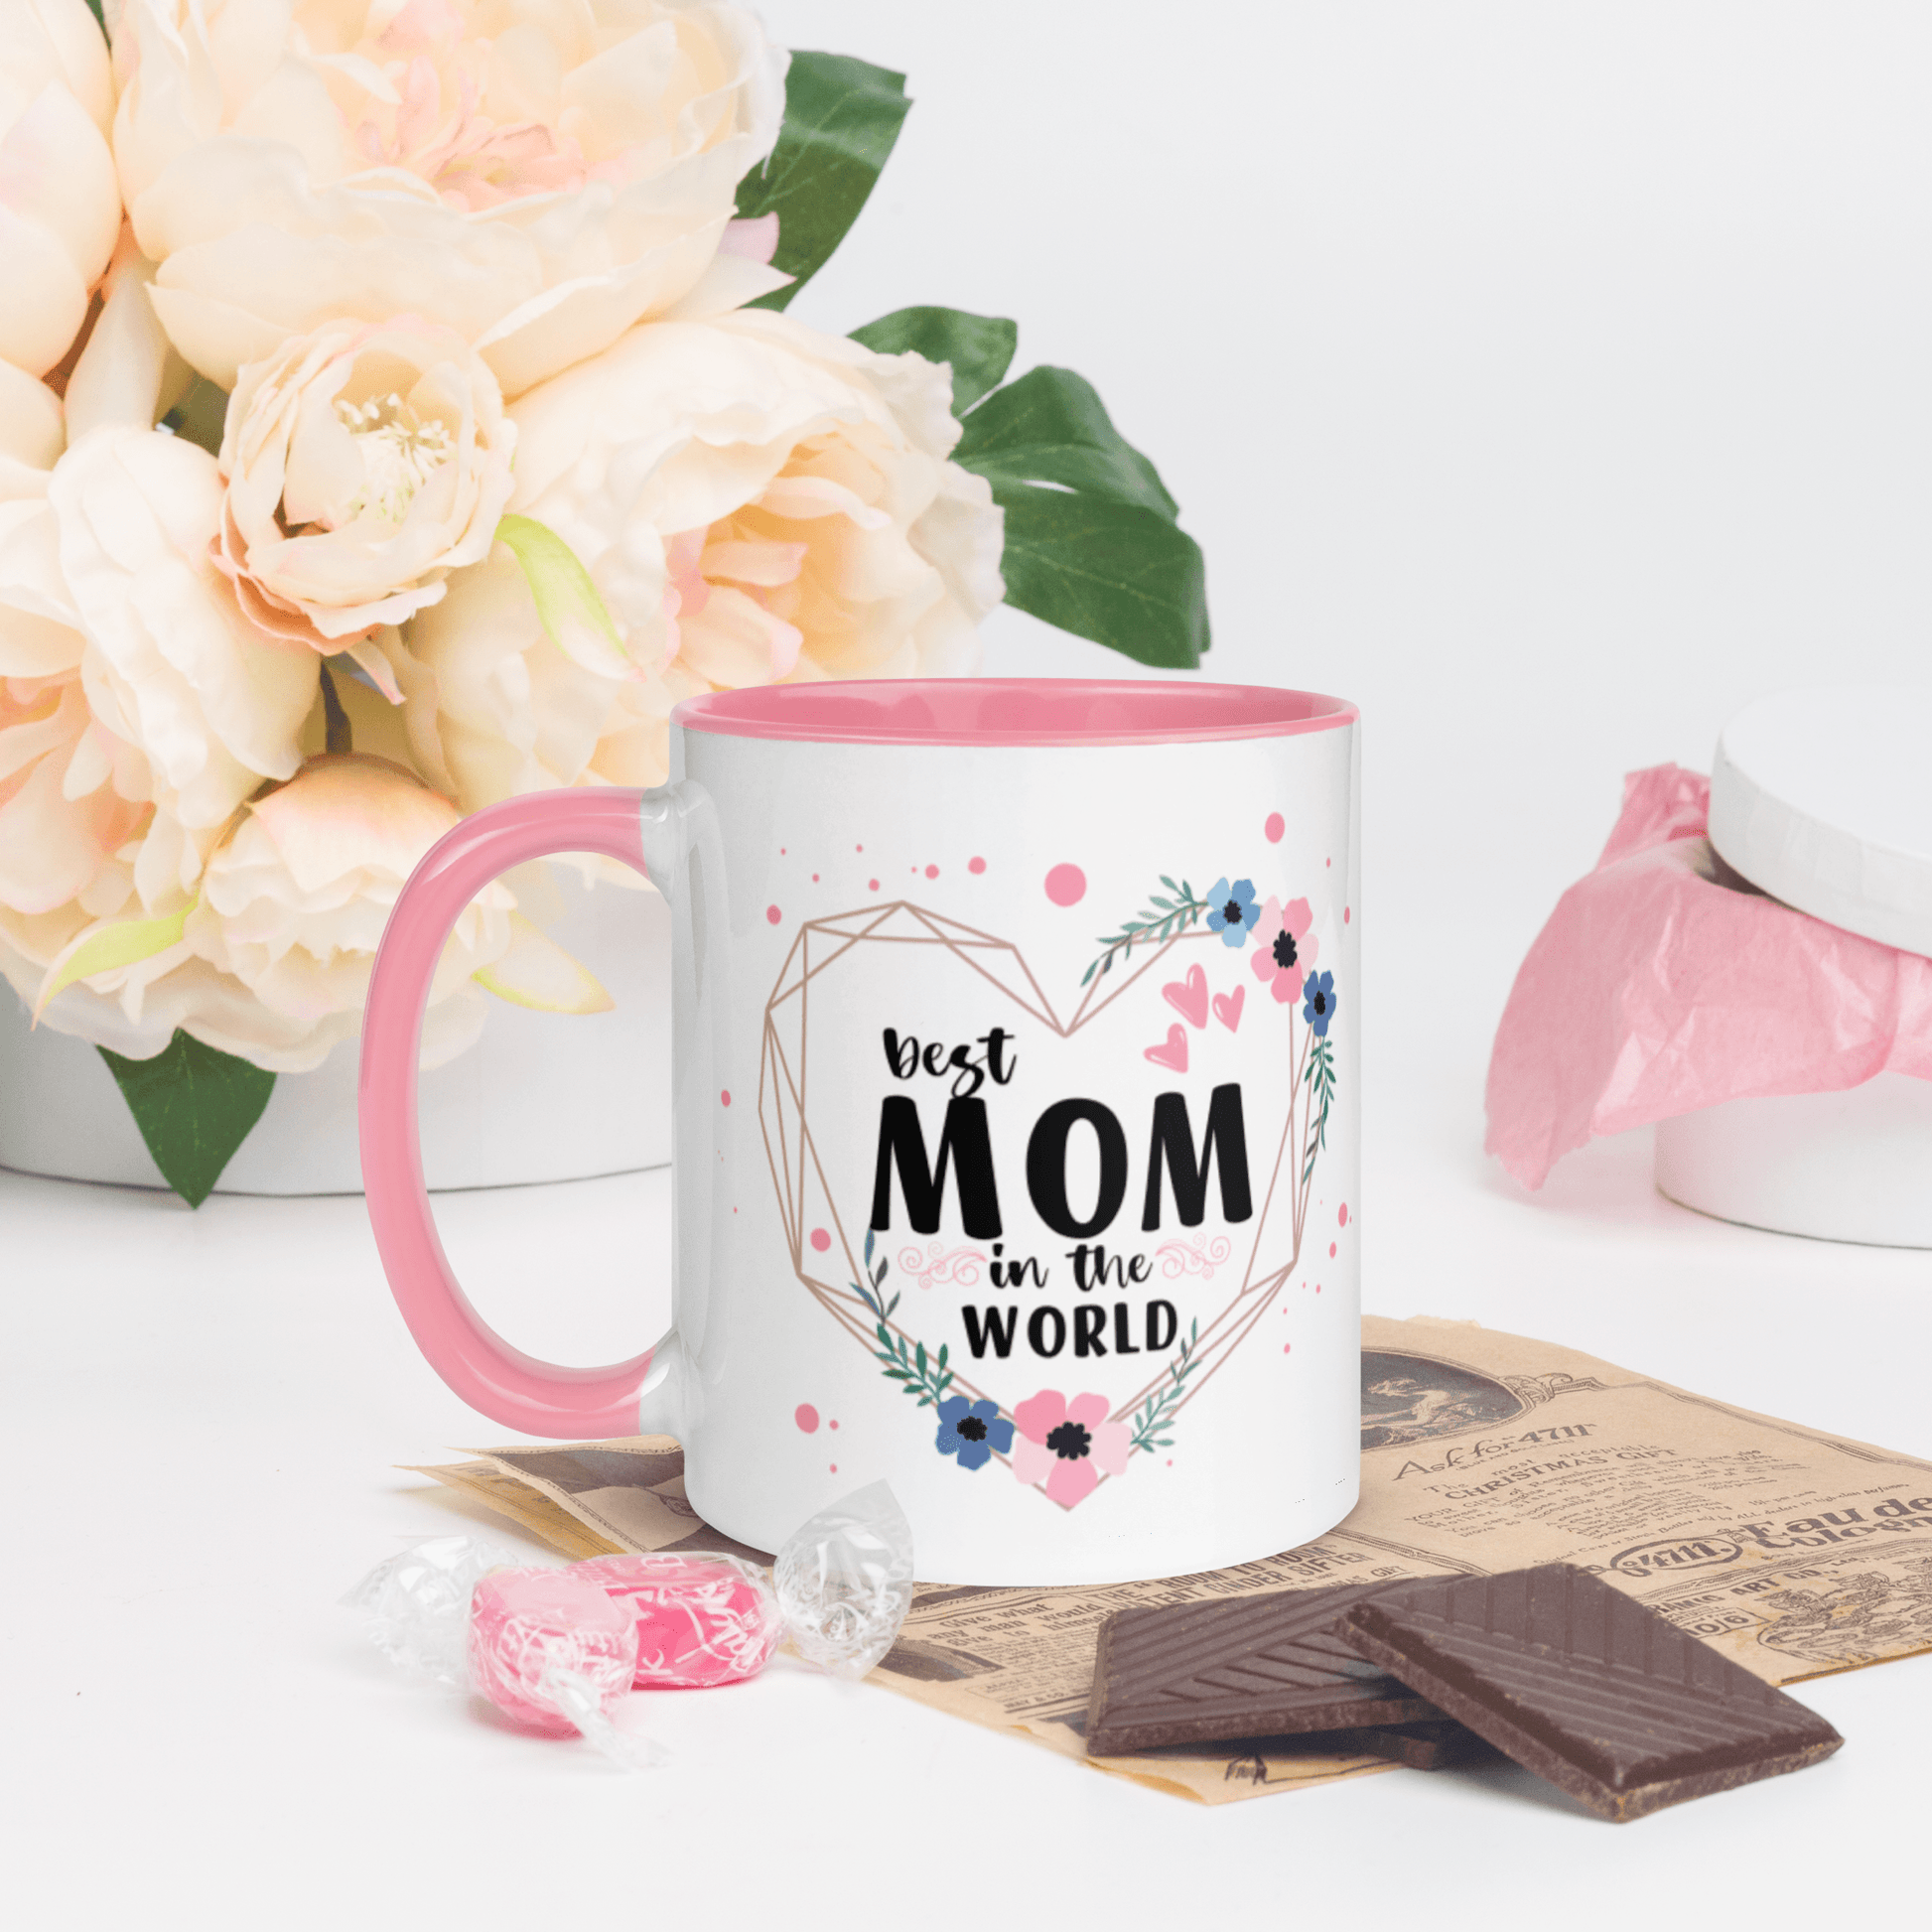 Best Mom in the World! ❤️ Ceramic Mug with Color Accent (Available in Various Colors!) - The Grateful Hearts